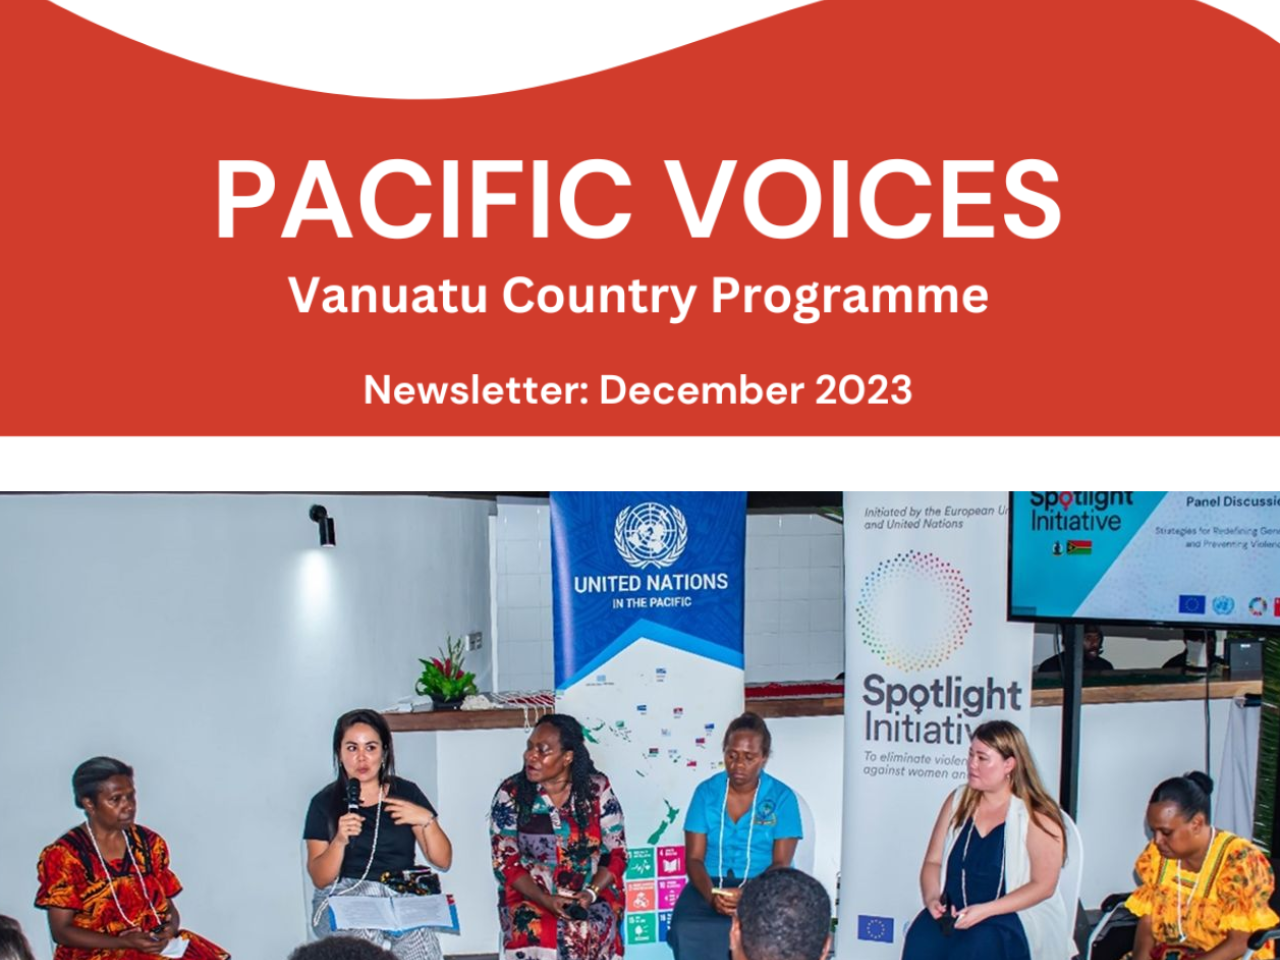 The title page of the newsletter with the logos of the Spotlight Initiative, Vanuatu flag and coat of arms